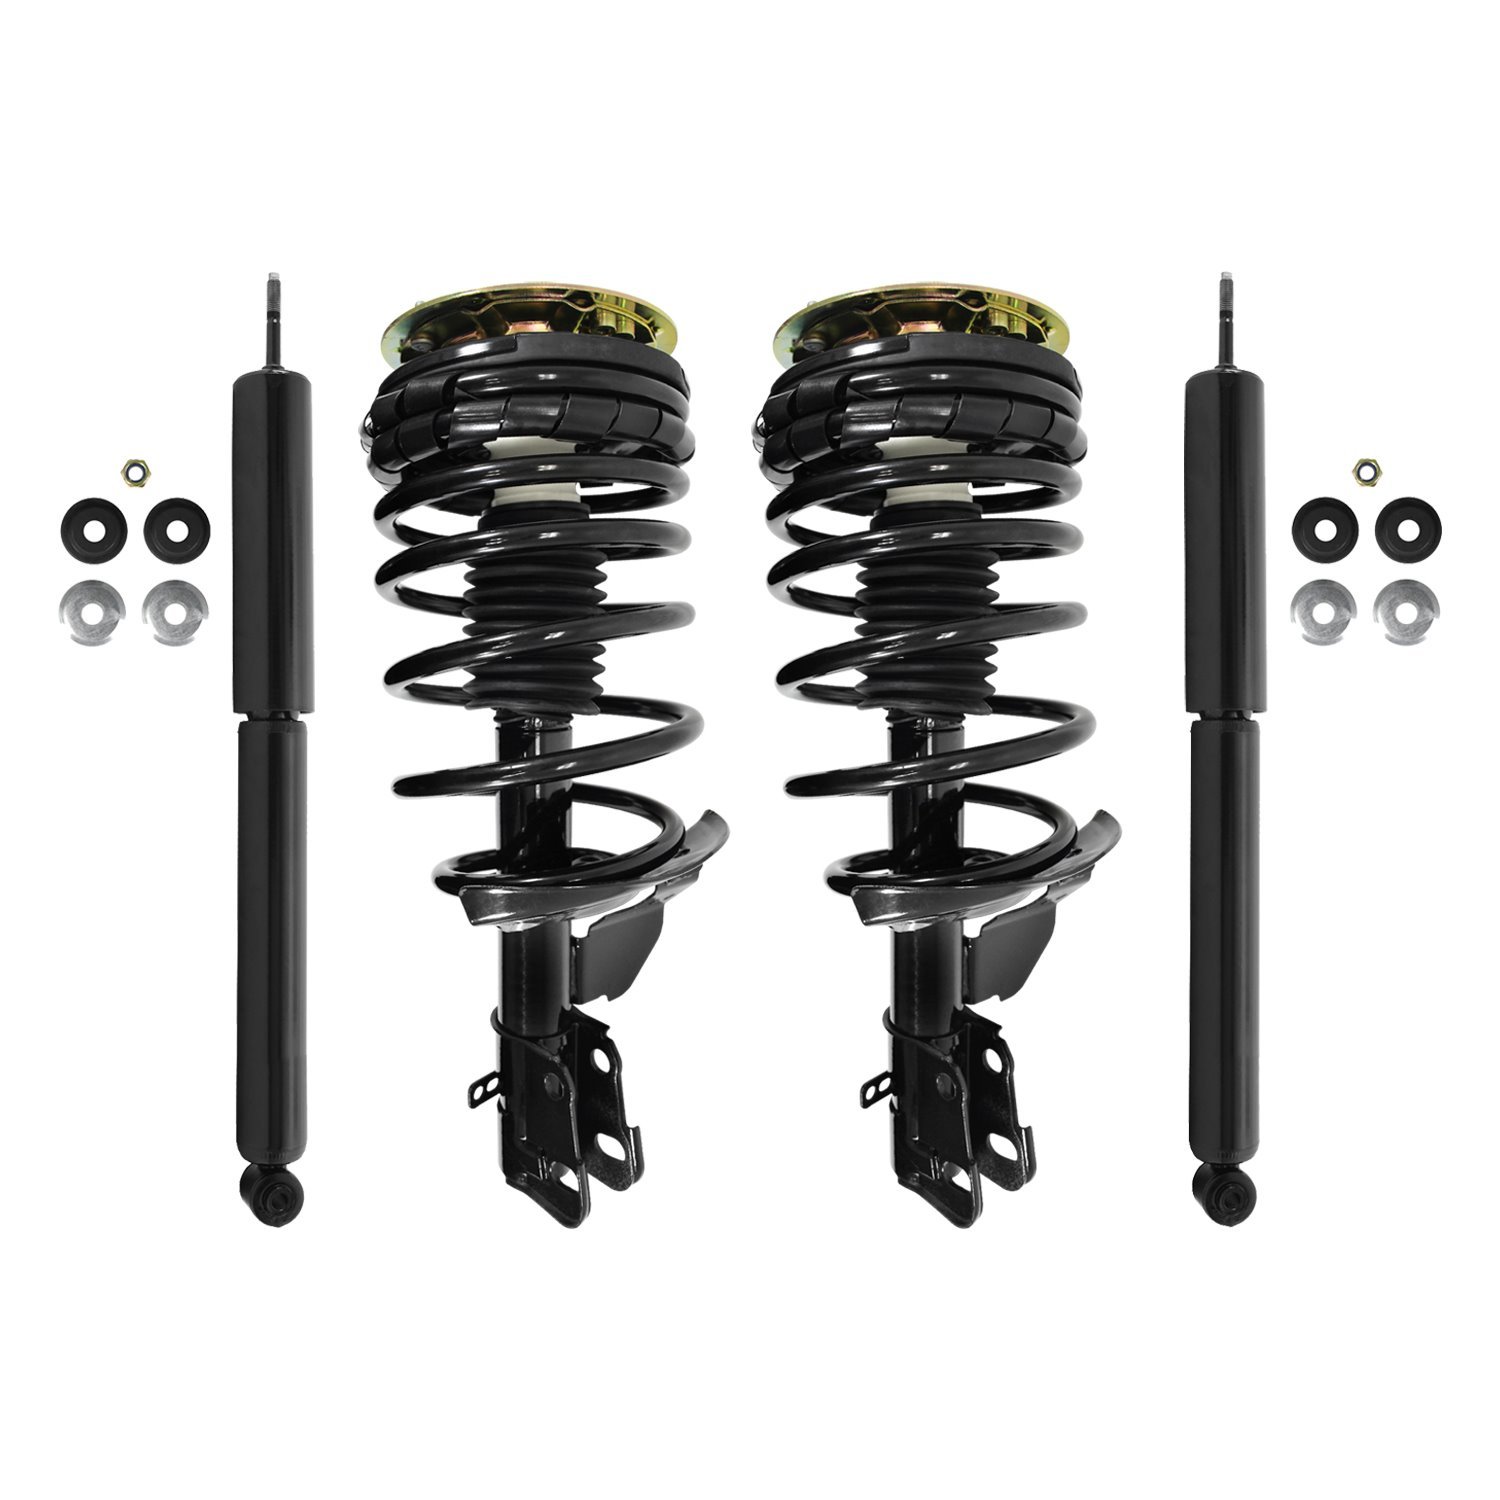 4-11250-251150-001 Front & Rear Suspension Strut & Coil Spring Assembly Fits Select GM